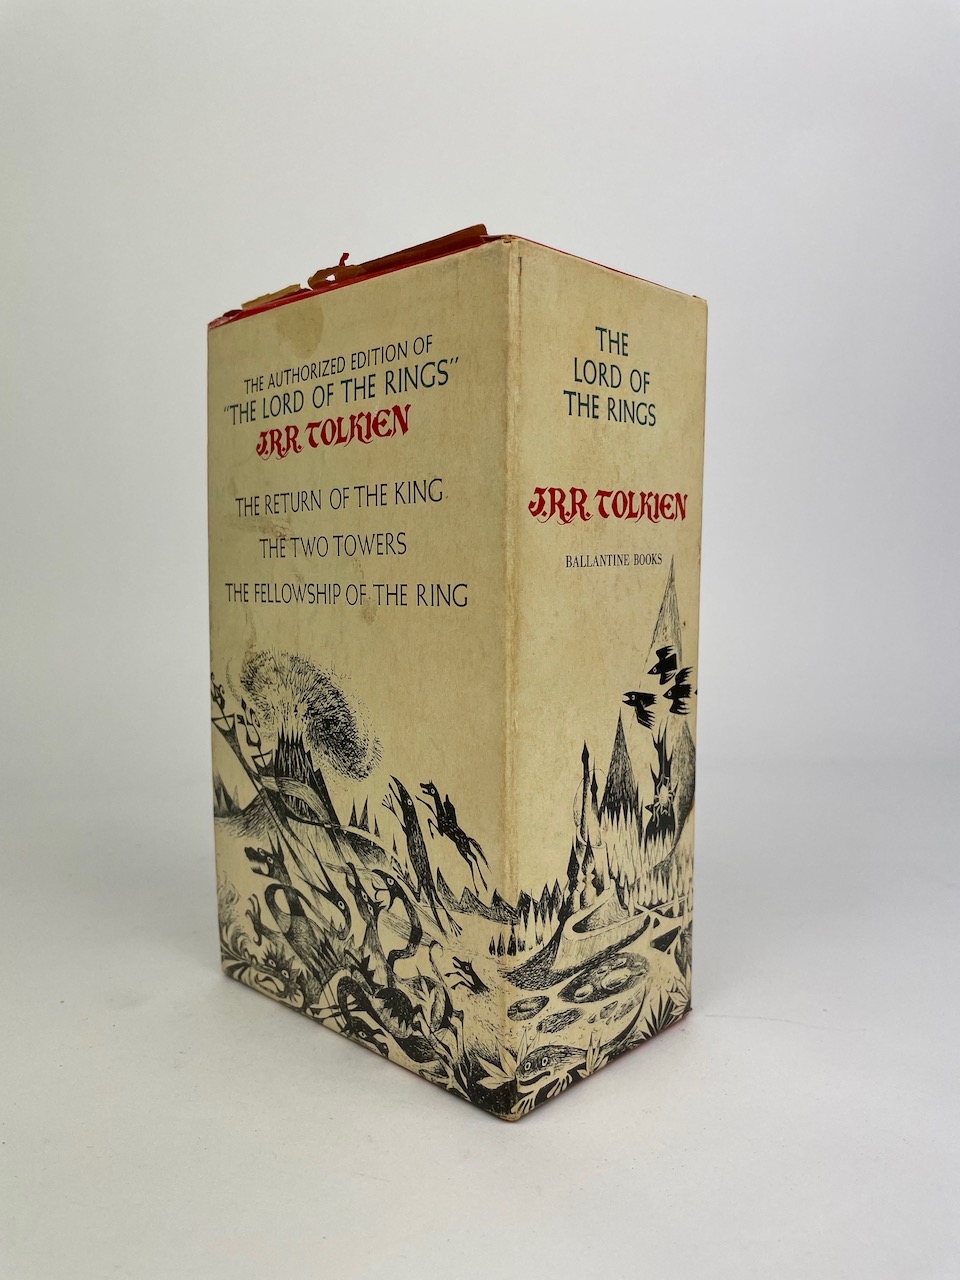 The Lord of the Rings from 1968, Authorized Edition in Black, White and Red Publishers Slipcase 4